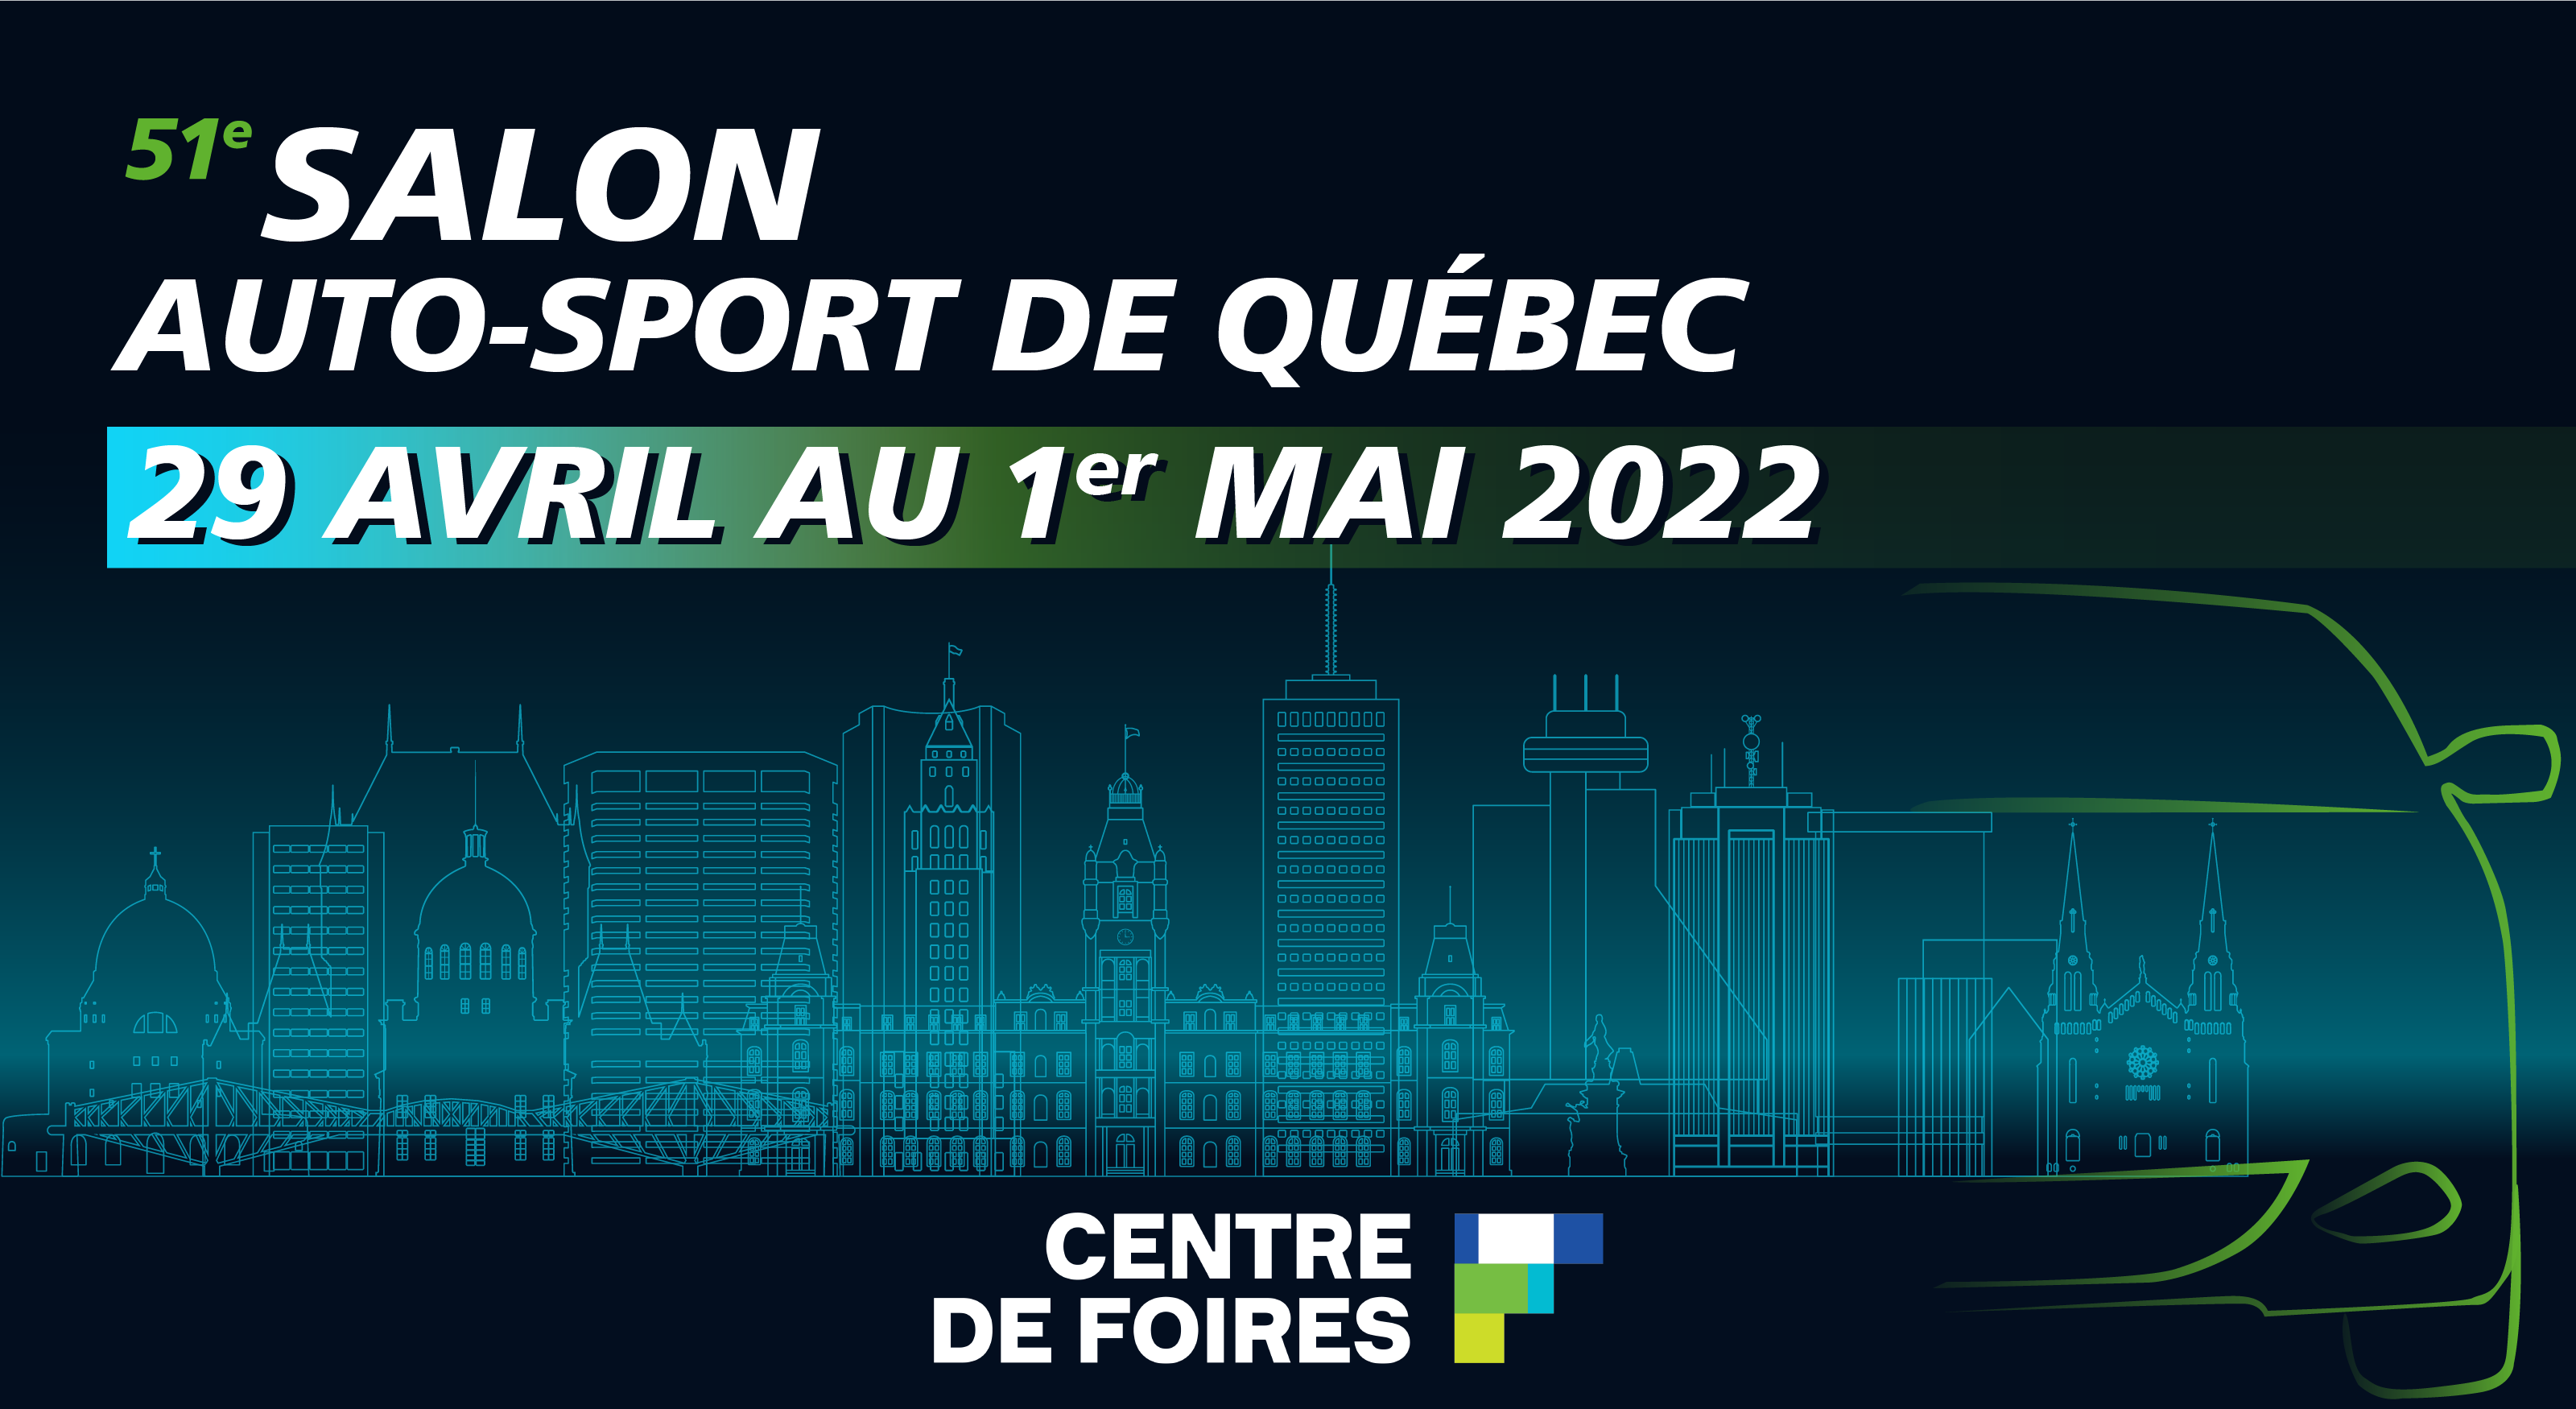 The Auto Sport Show is back in 2022!